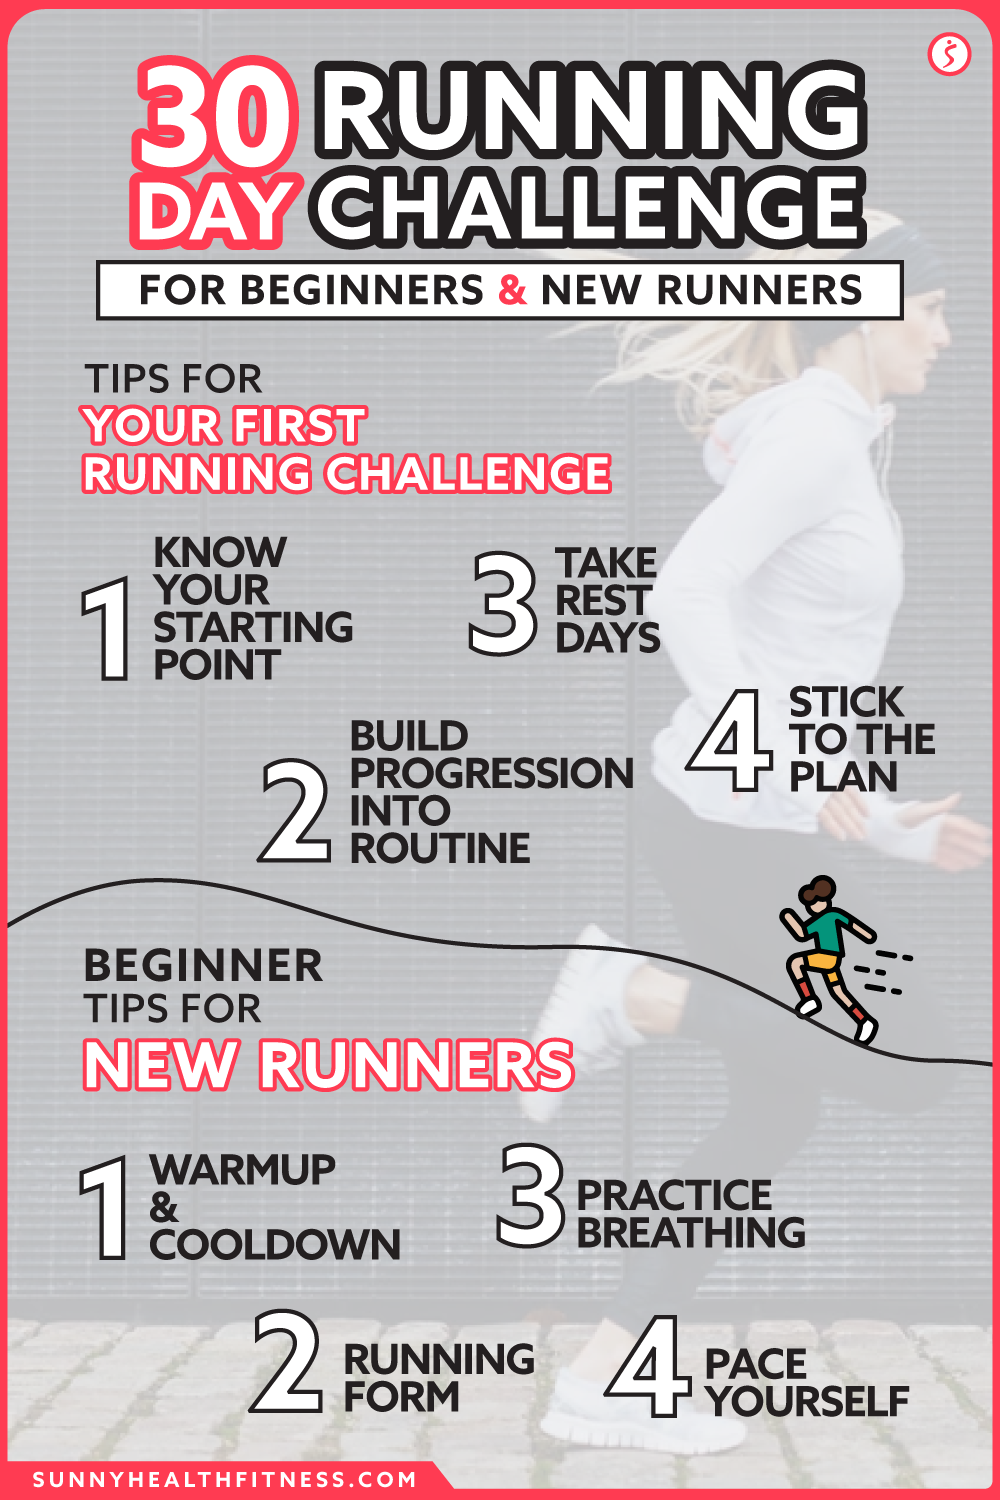 You Too Can Be a Runner! This 30-Day Walk-to-Run Plan Will Get You There